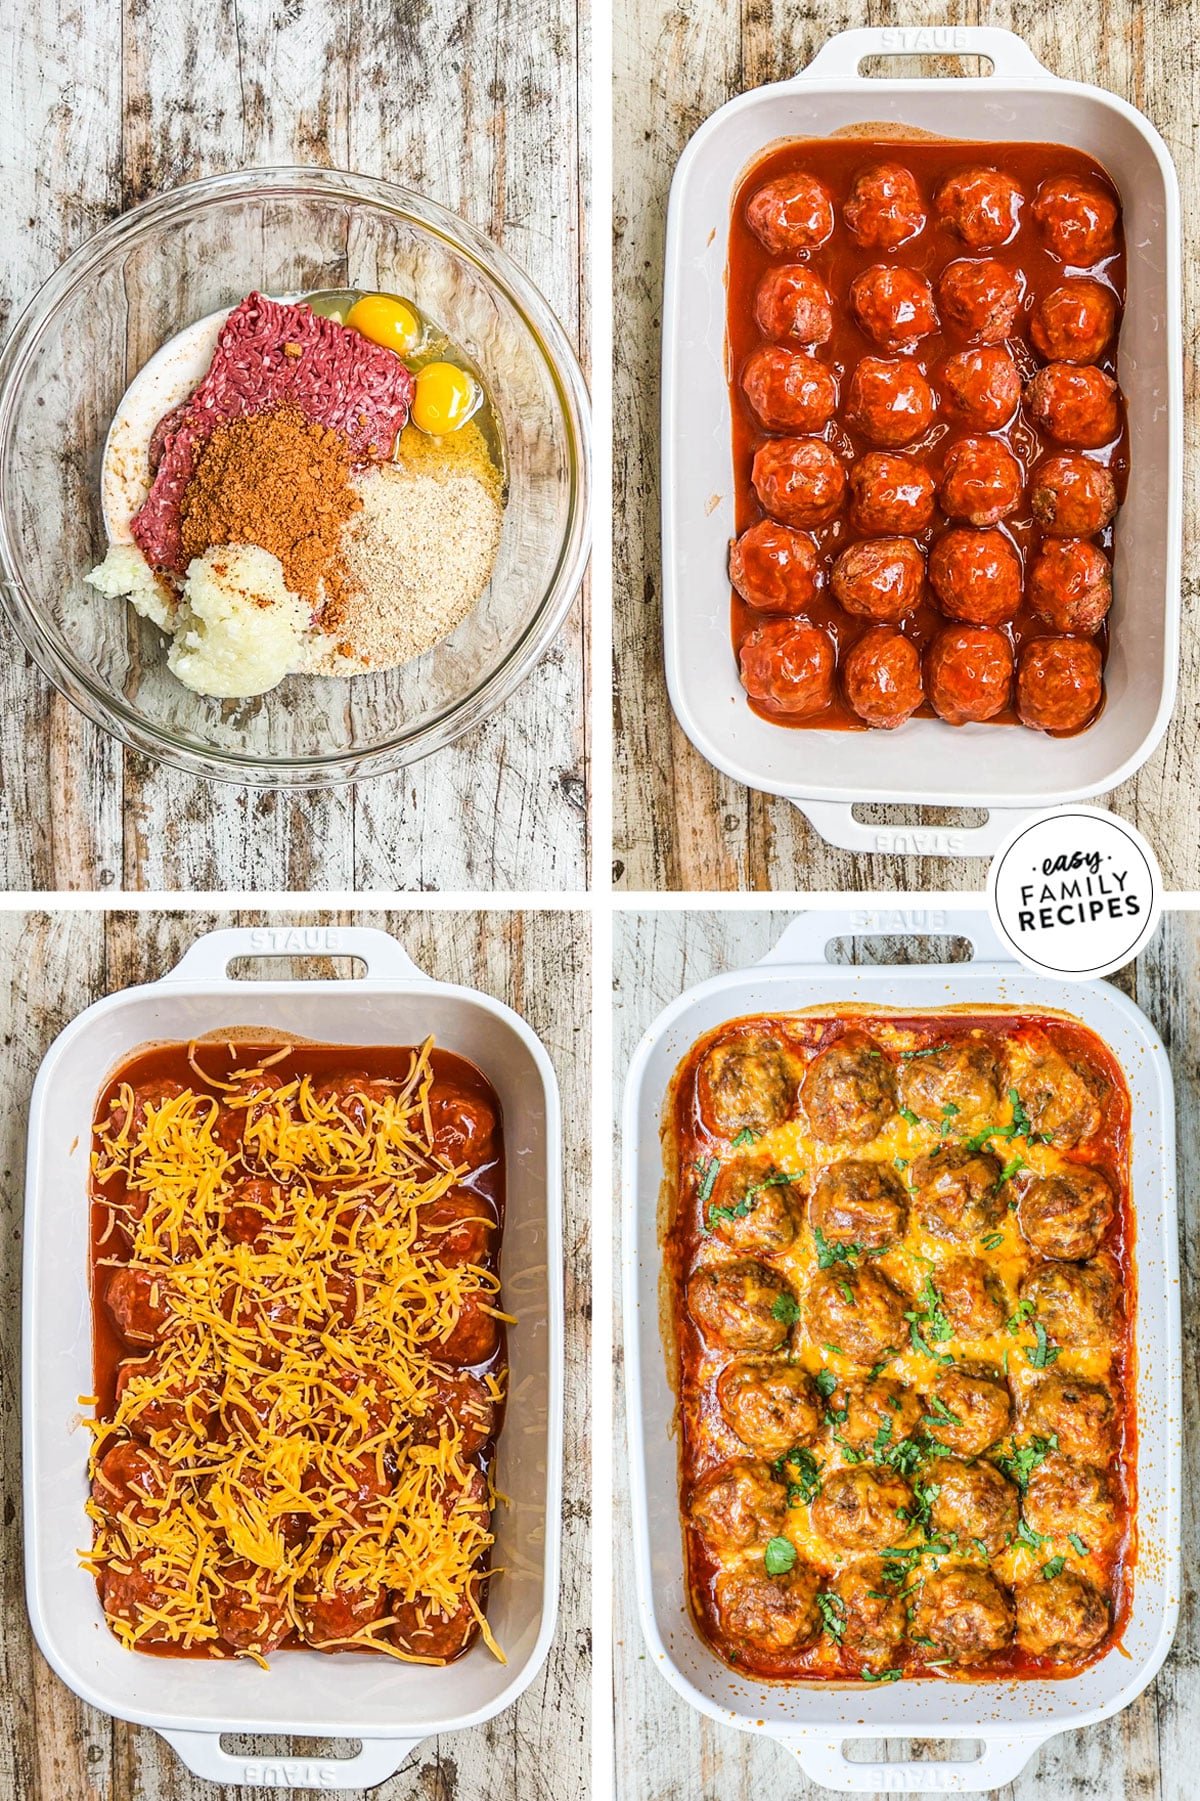 4 image collage making recipe: 1- meatball ingredients in a bowl, 2- after forming into balls and added to baking in dish in rows with enchilada sauce, 3- shredded cheese sprinkled over, 4- after baking.